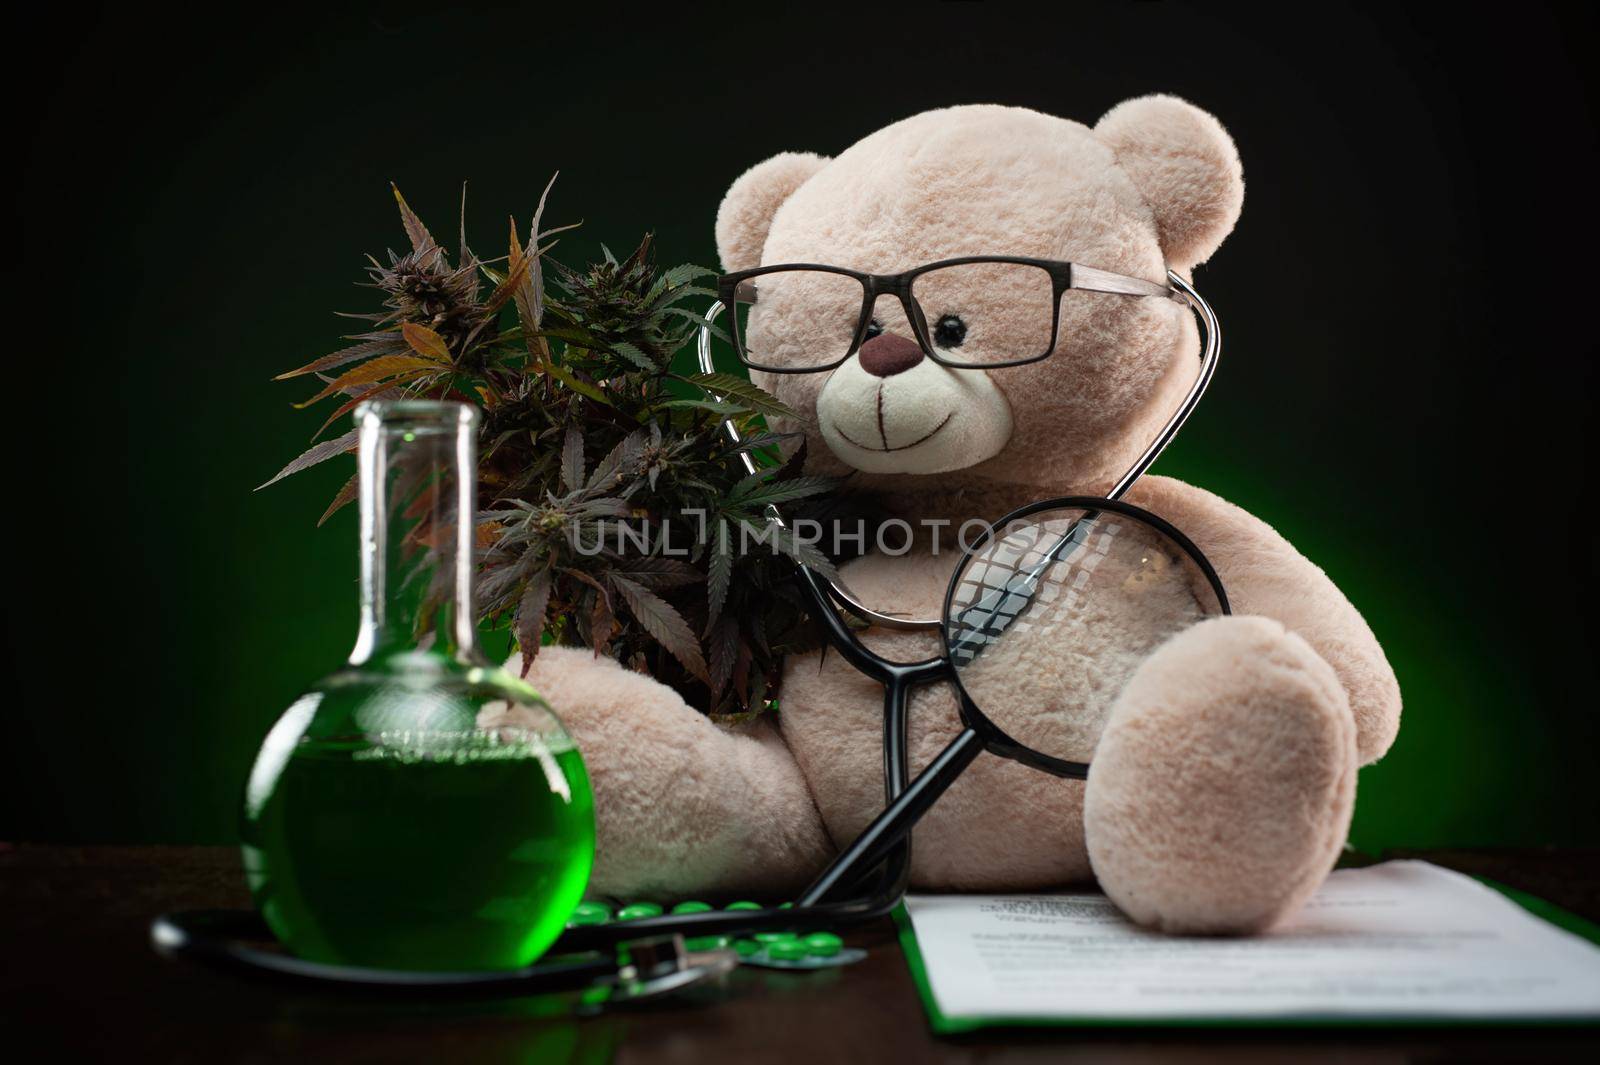 the cannabis plant for medical purposes and research , creative composition with a teddy bear